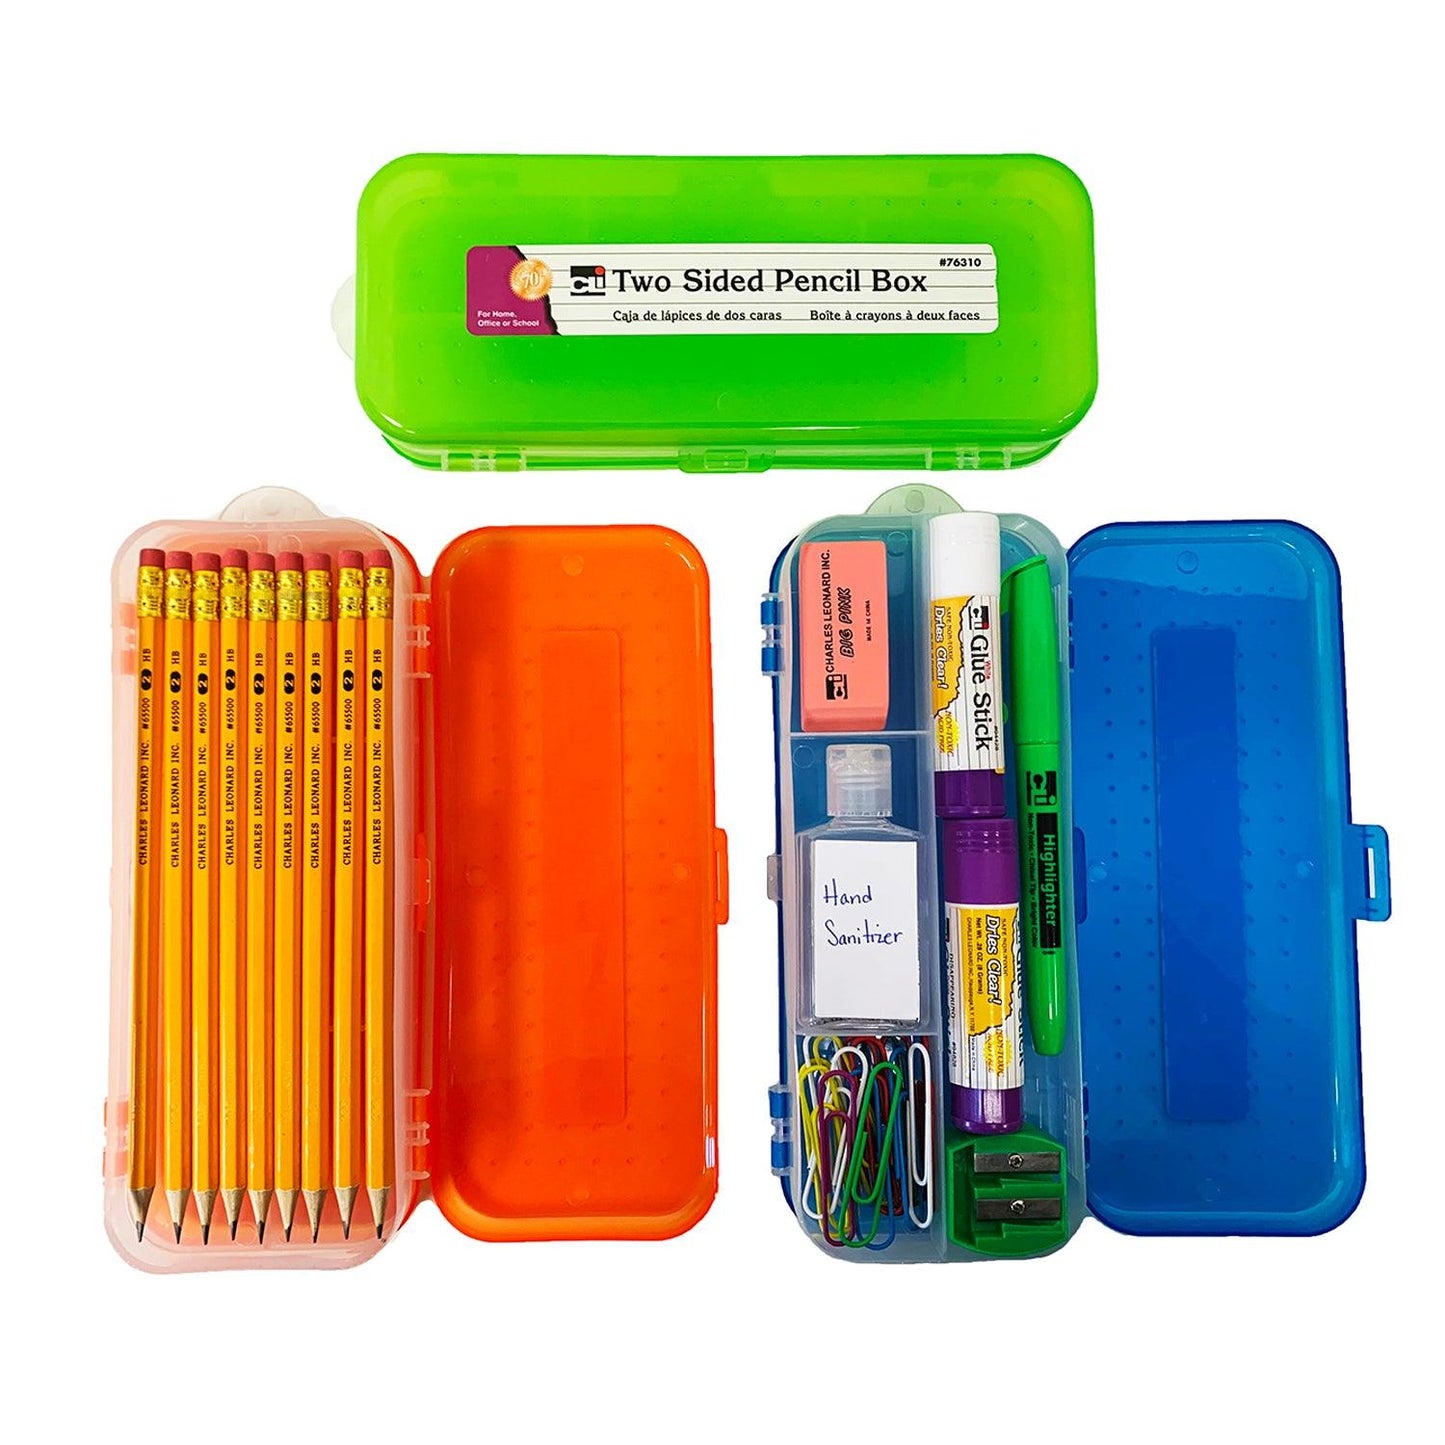 Pencil Box, Double Sided, Assorted Colors, Pack of 24 - Loomini